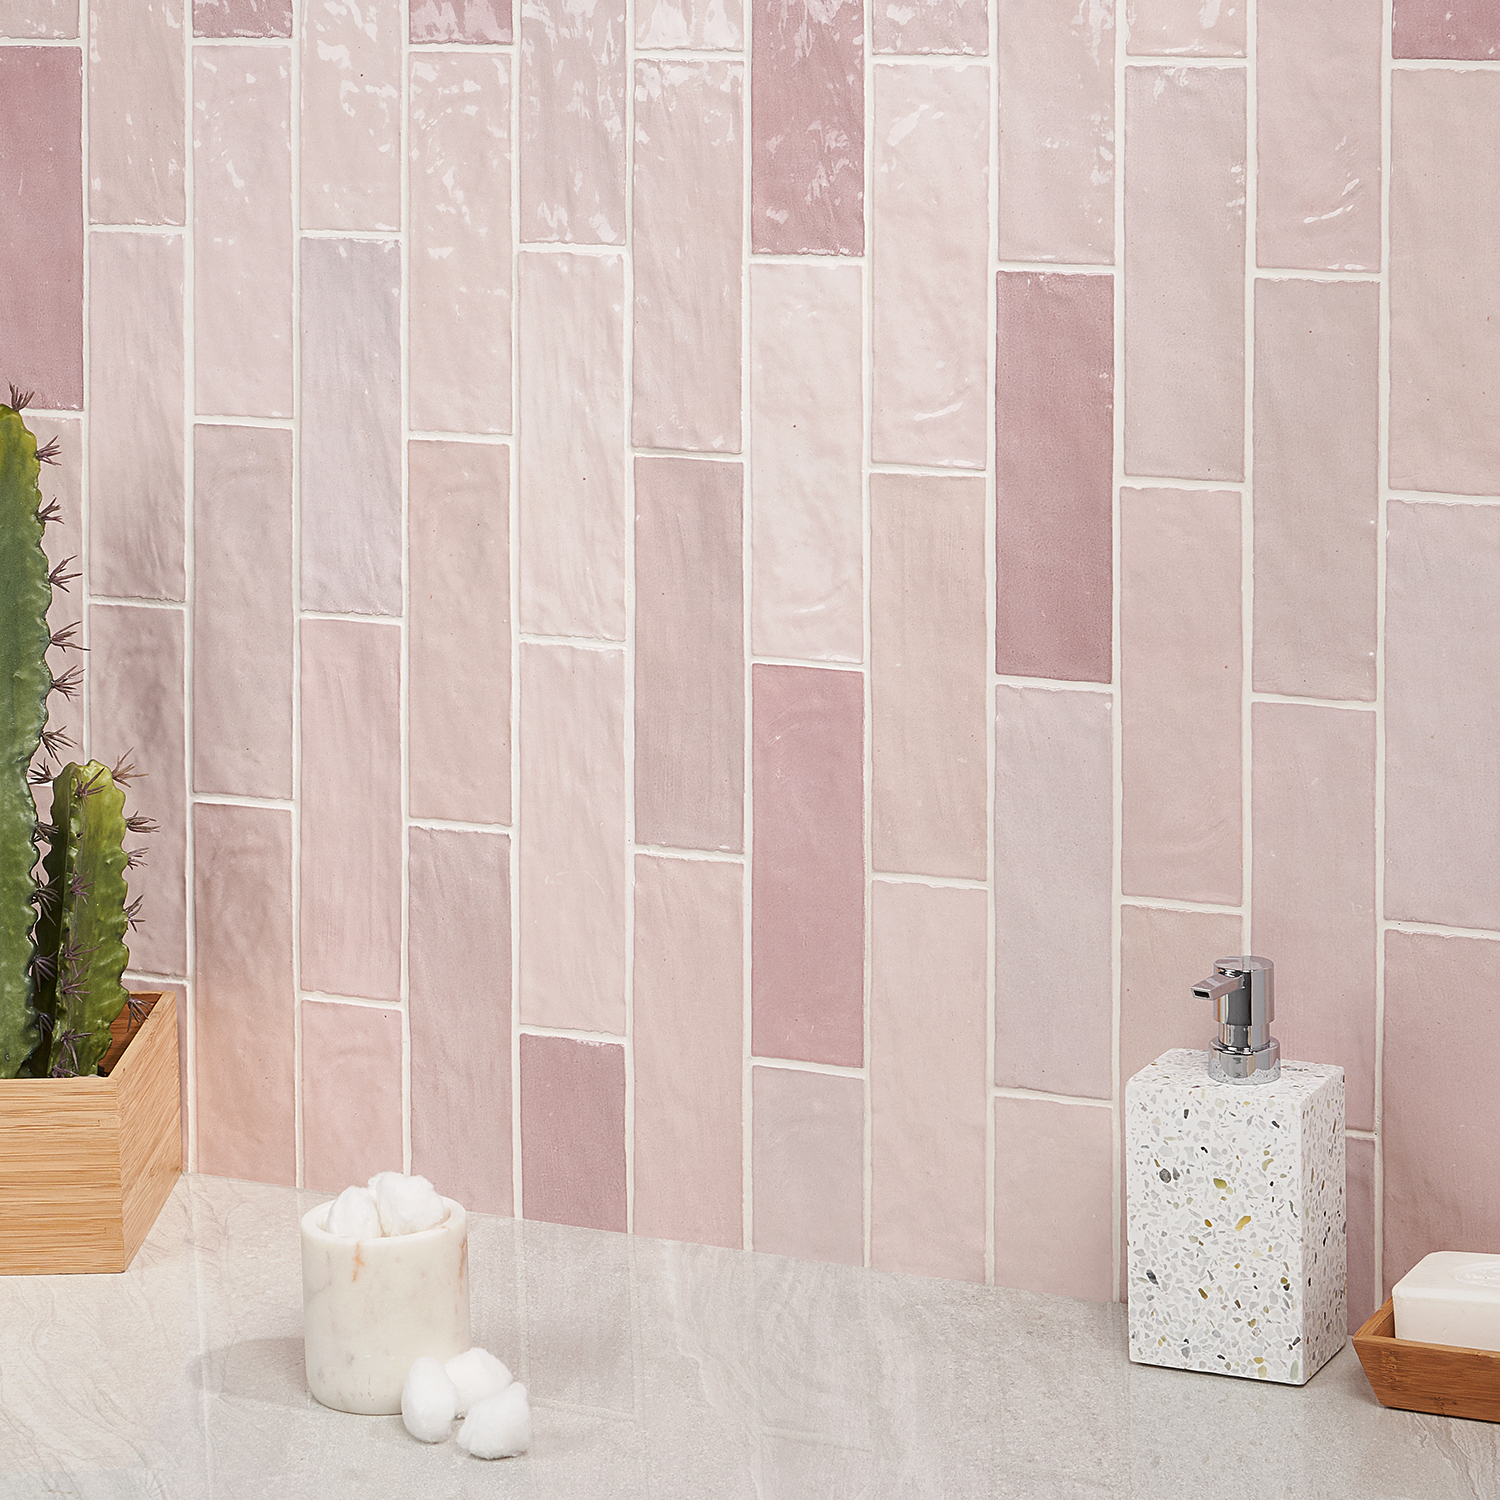 Portmore Pink 3x8 Glazed Ceramic Wall Tile used vertically 